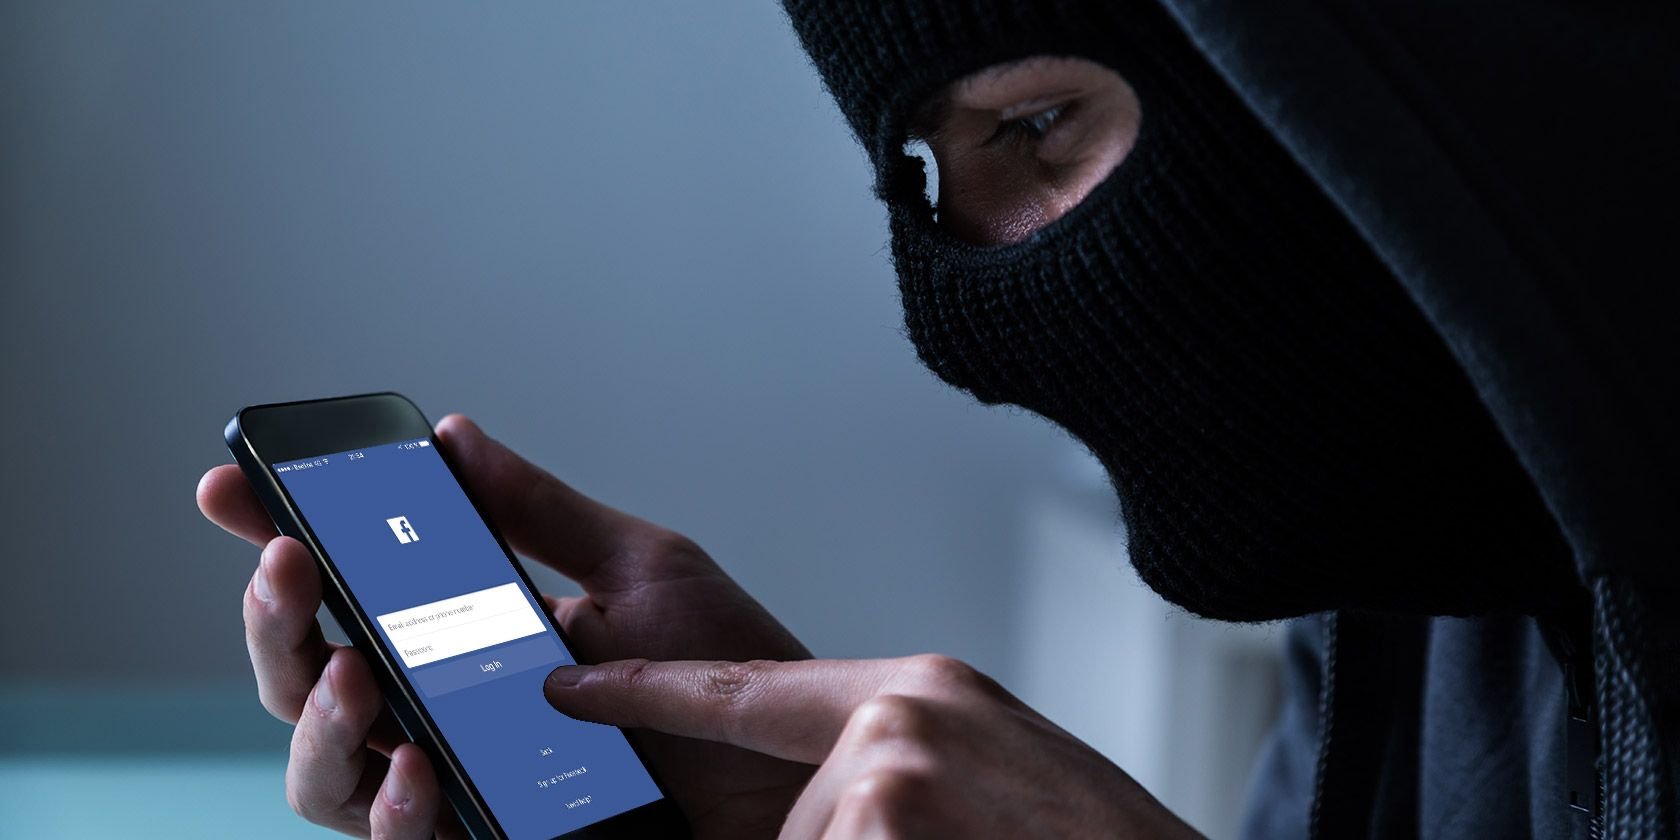 What Should You Do After Falling Victim to an Online Scam?